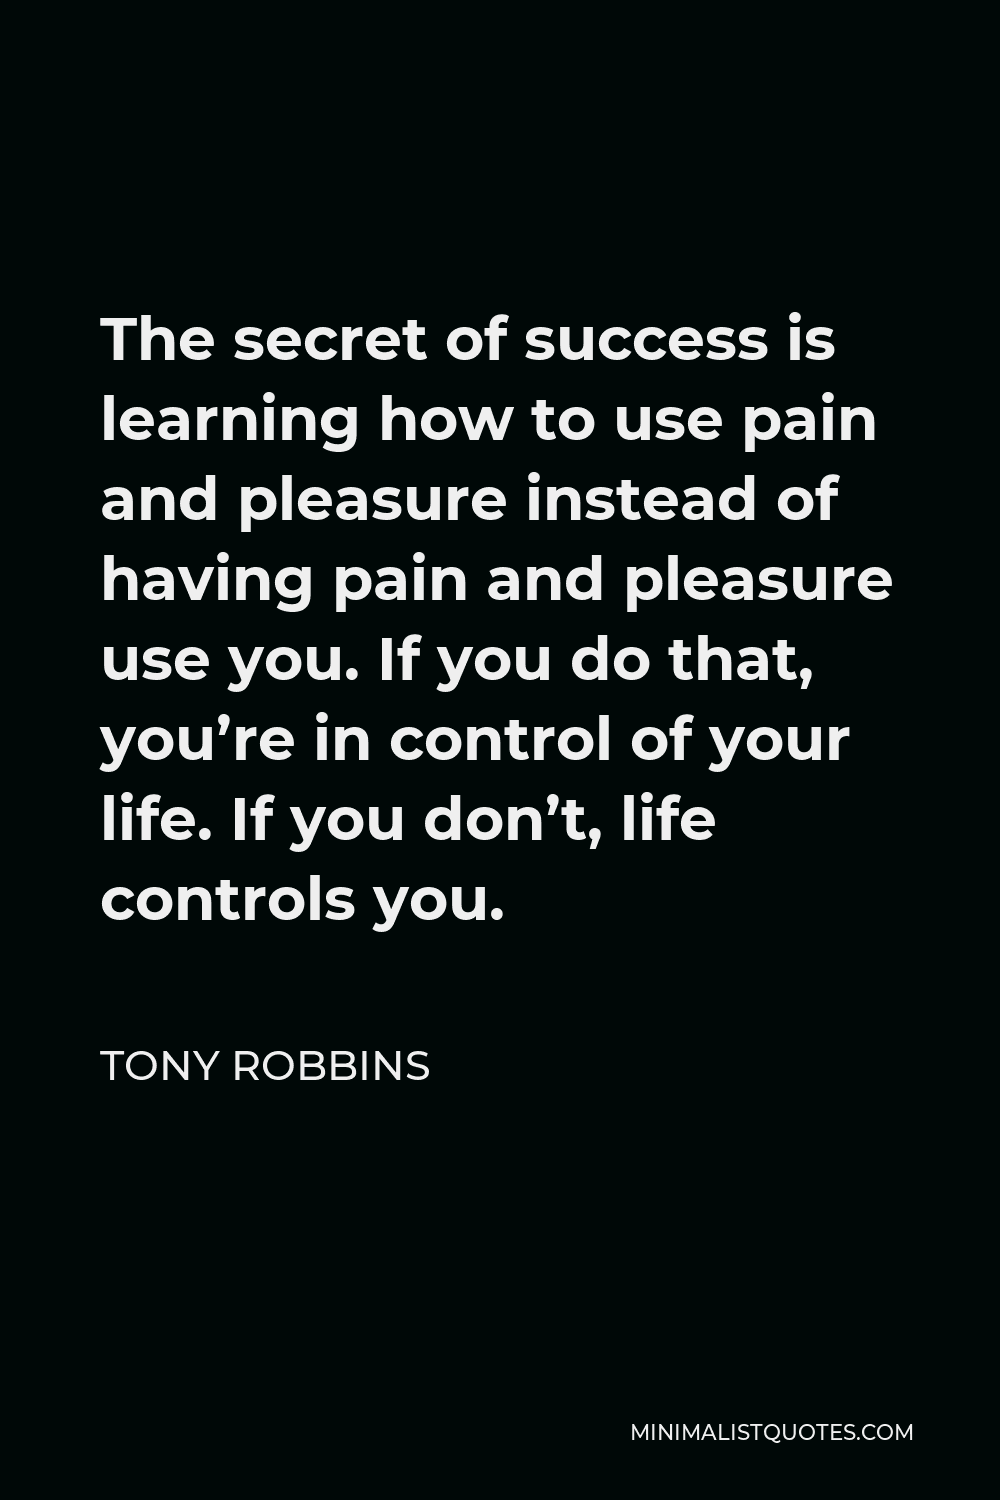 Tony Robbins Quote - The secret of success is learning how to use pain and pleasure instead of having pain and pleasure use you. If you do that, you’re in control of your life. If you don’t, life controls you.